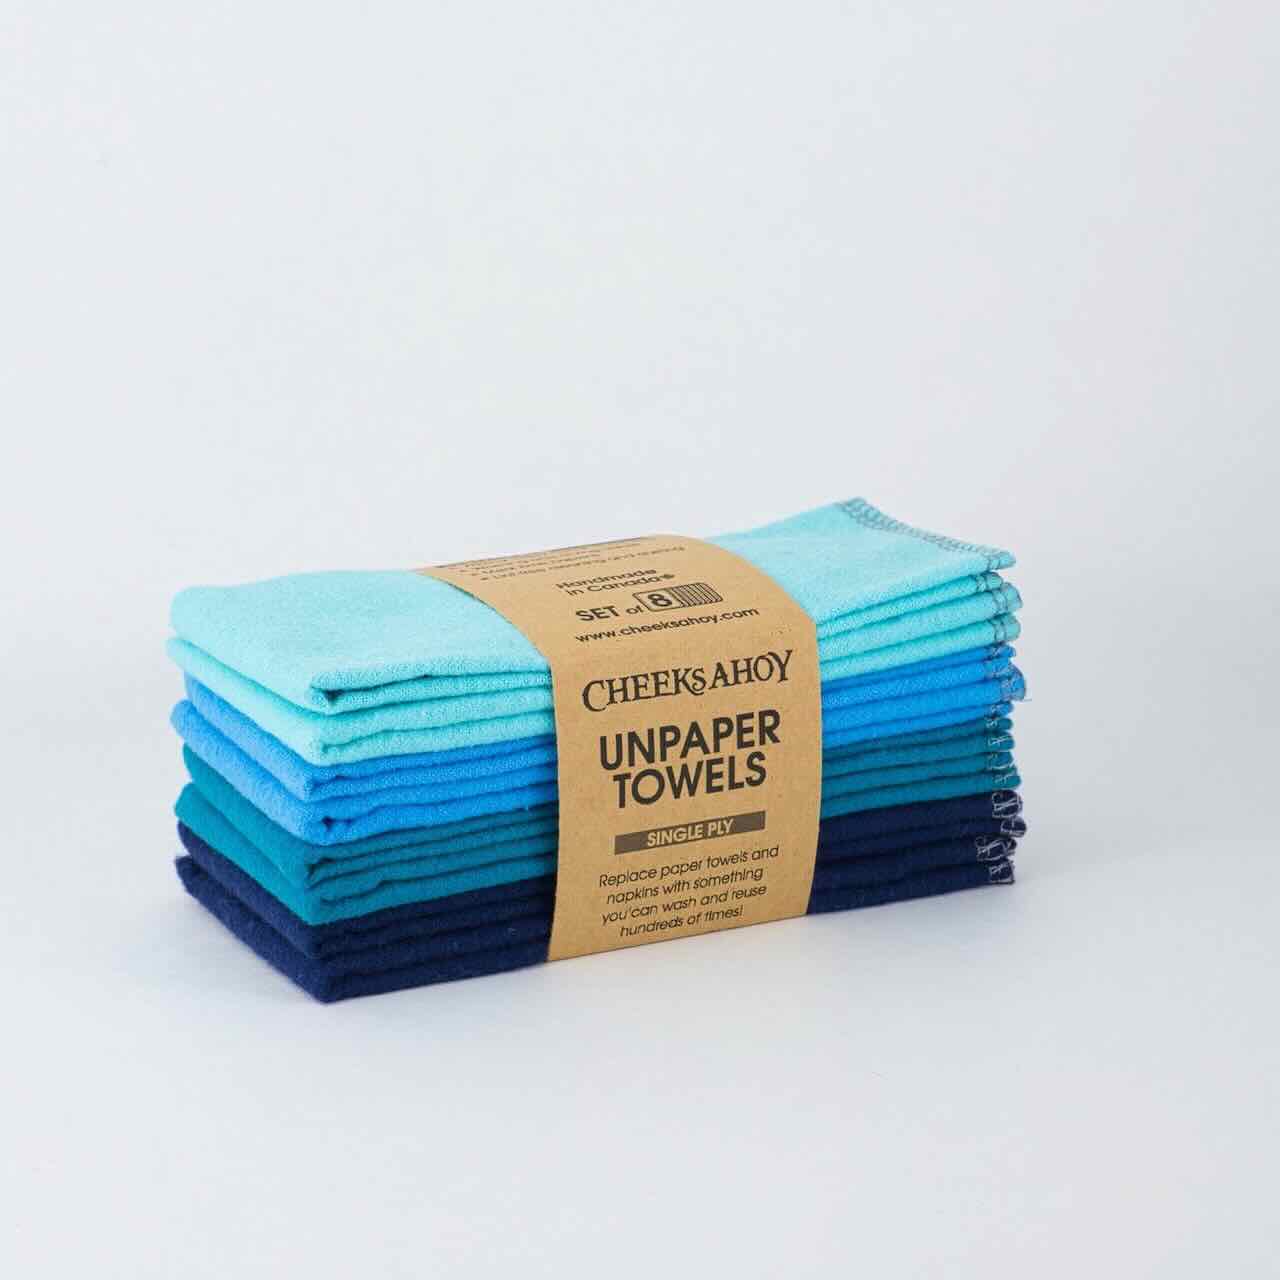 cheeks ahoy different shades of blue of unpaper towels set of 8 on top of a plain table top.